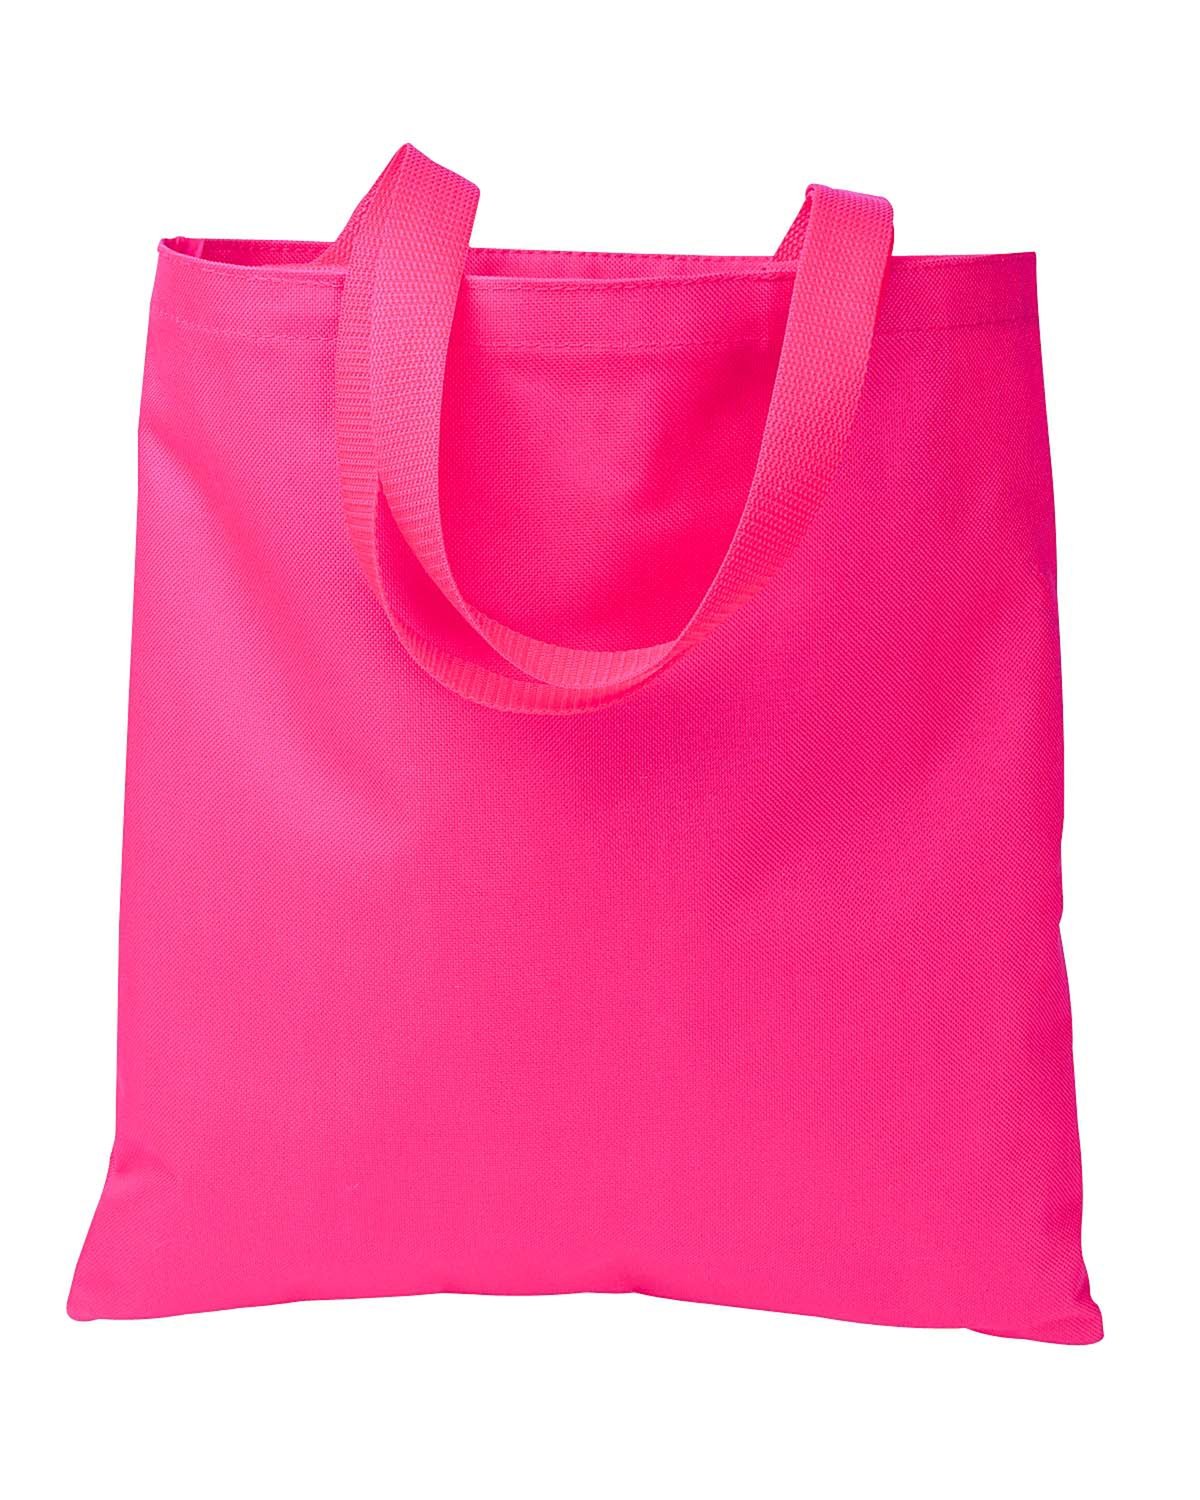 Bags and Accessories HOT PINK OS Liberty Bags